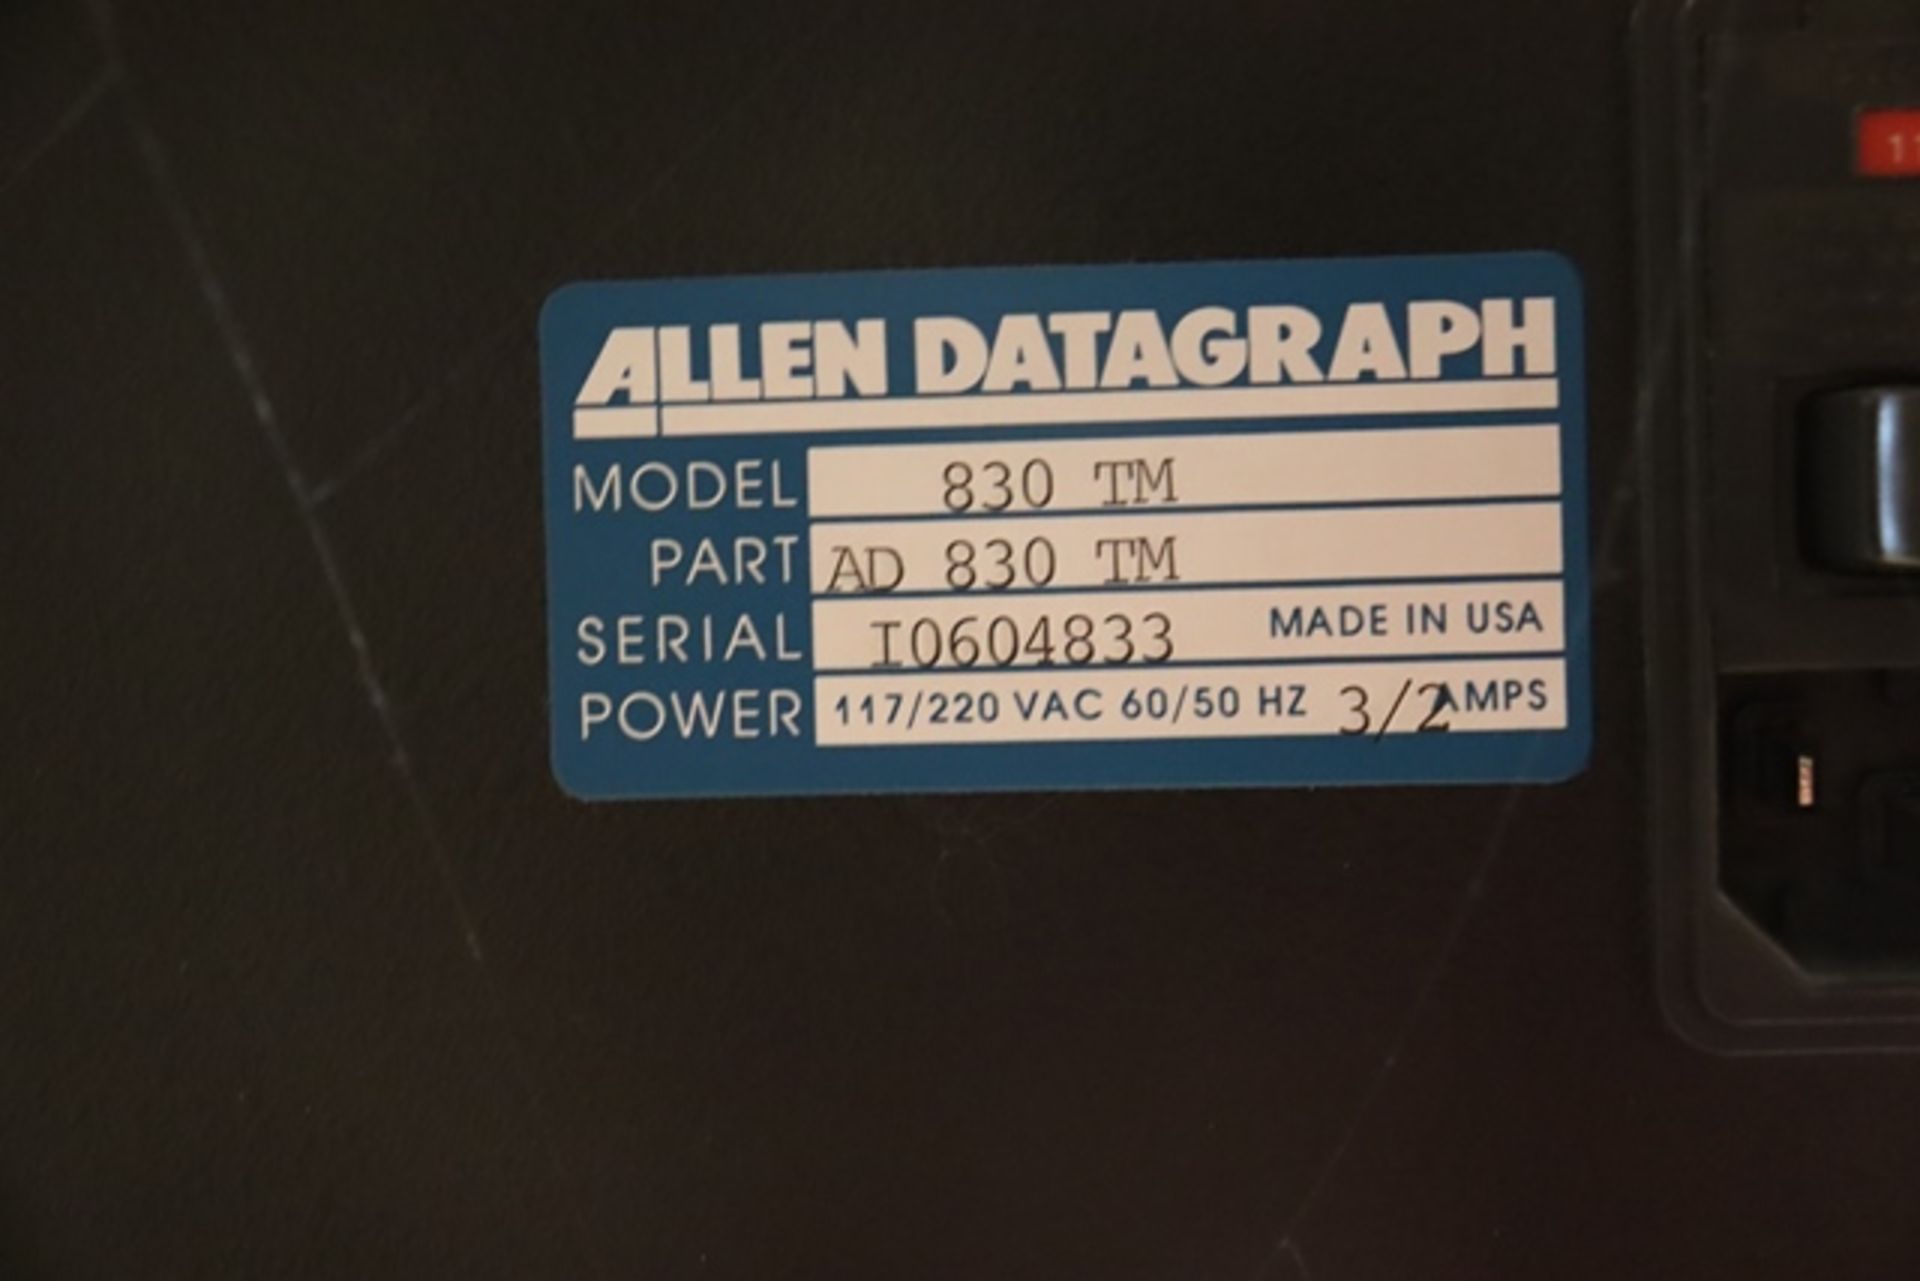 Allen Datagraph template Monur 30 - AS IS - Image 4 of 4